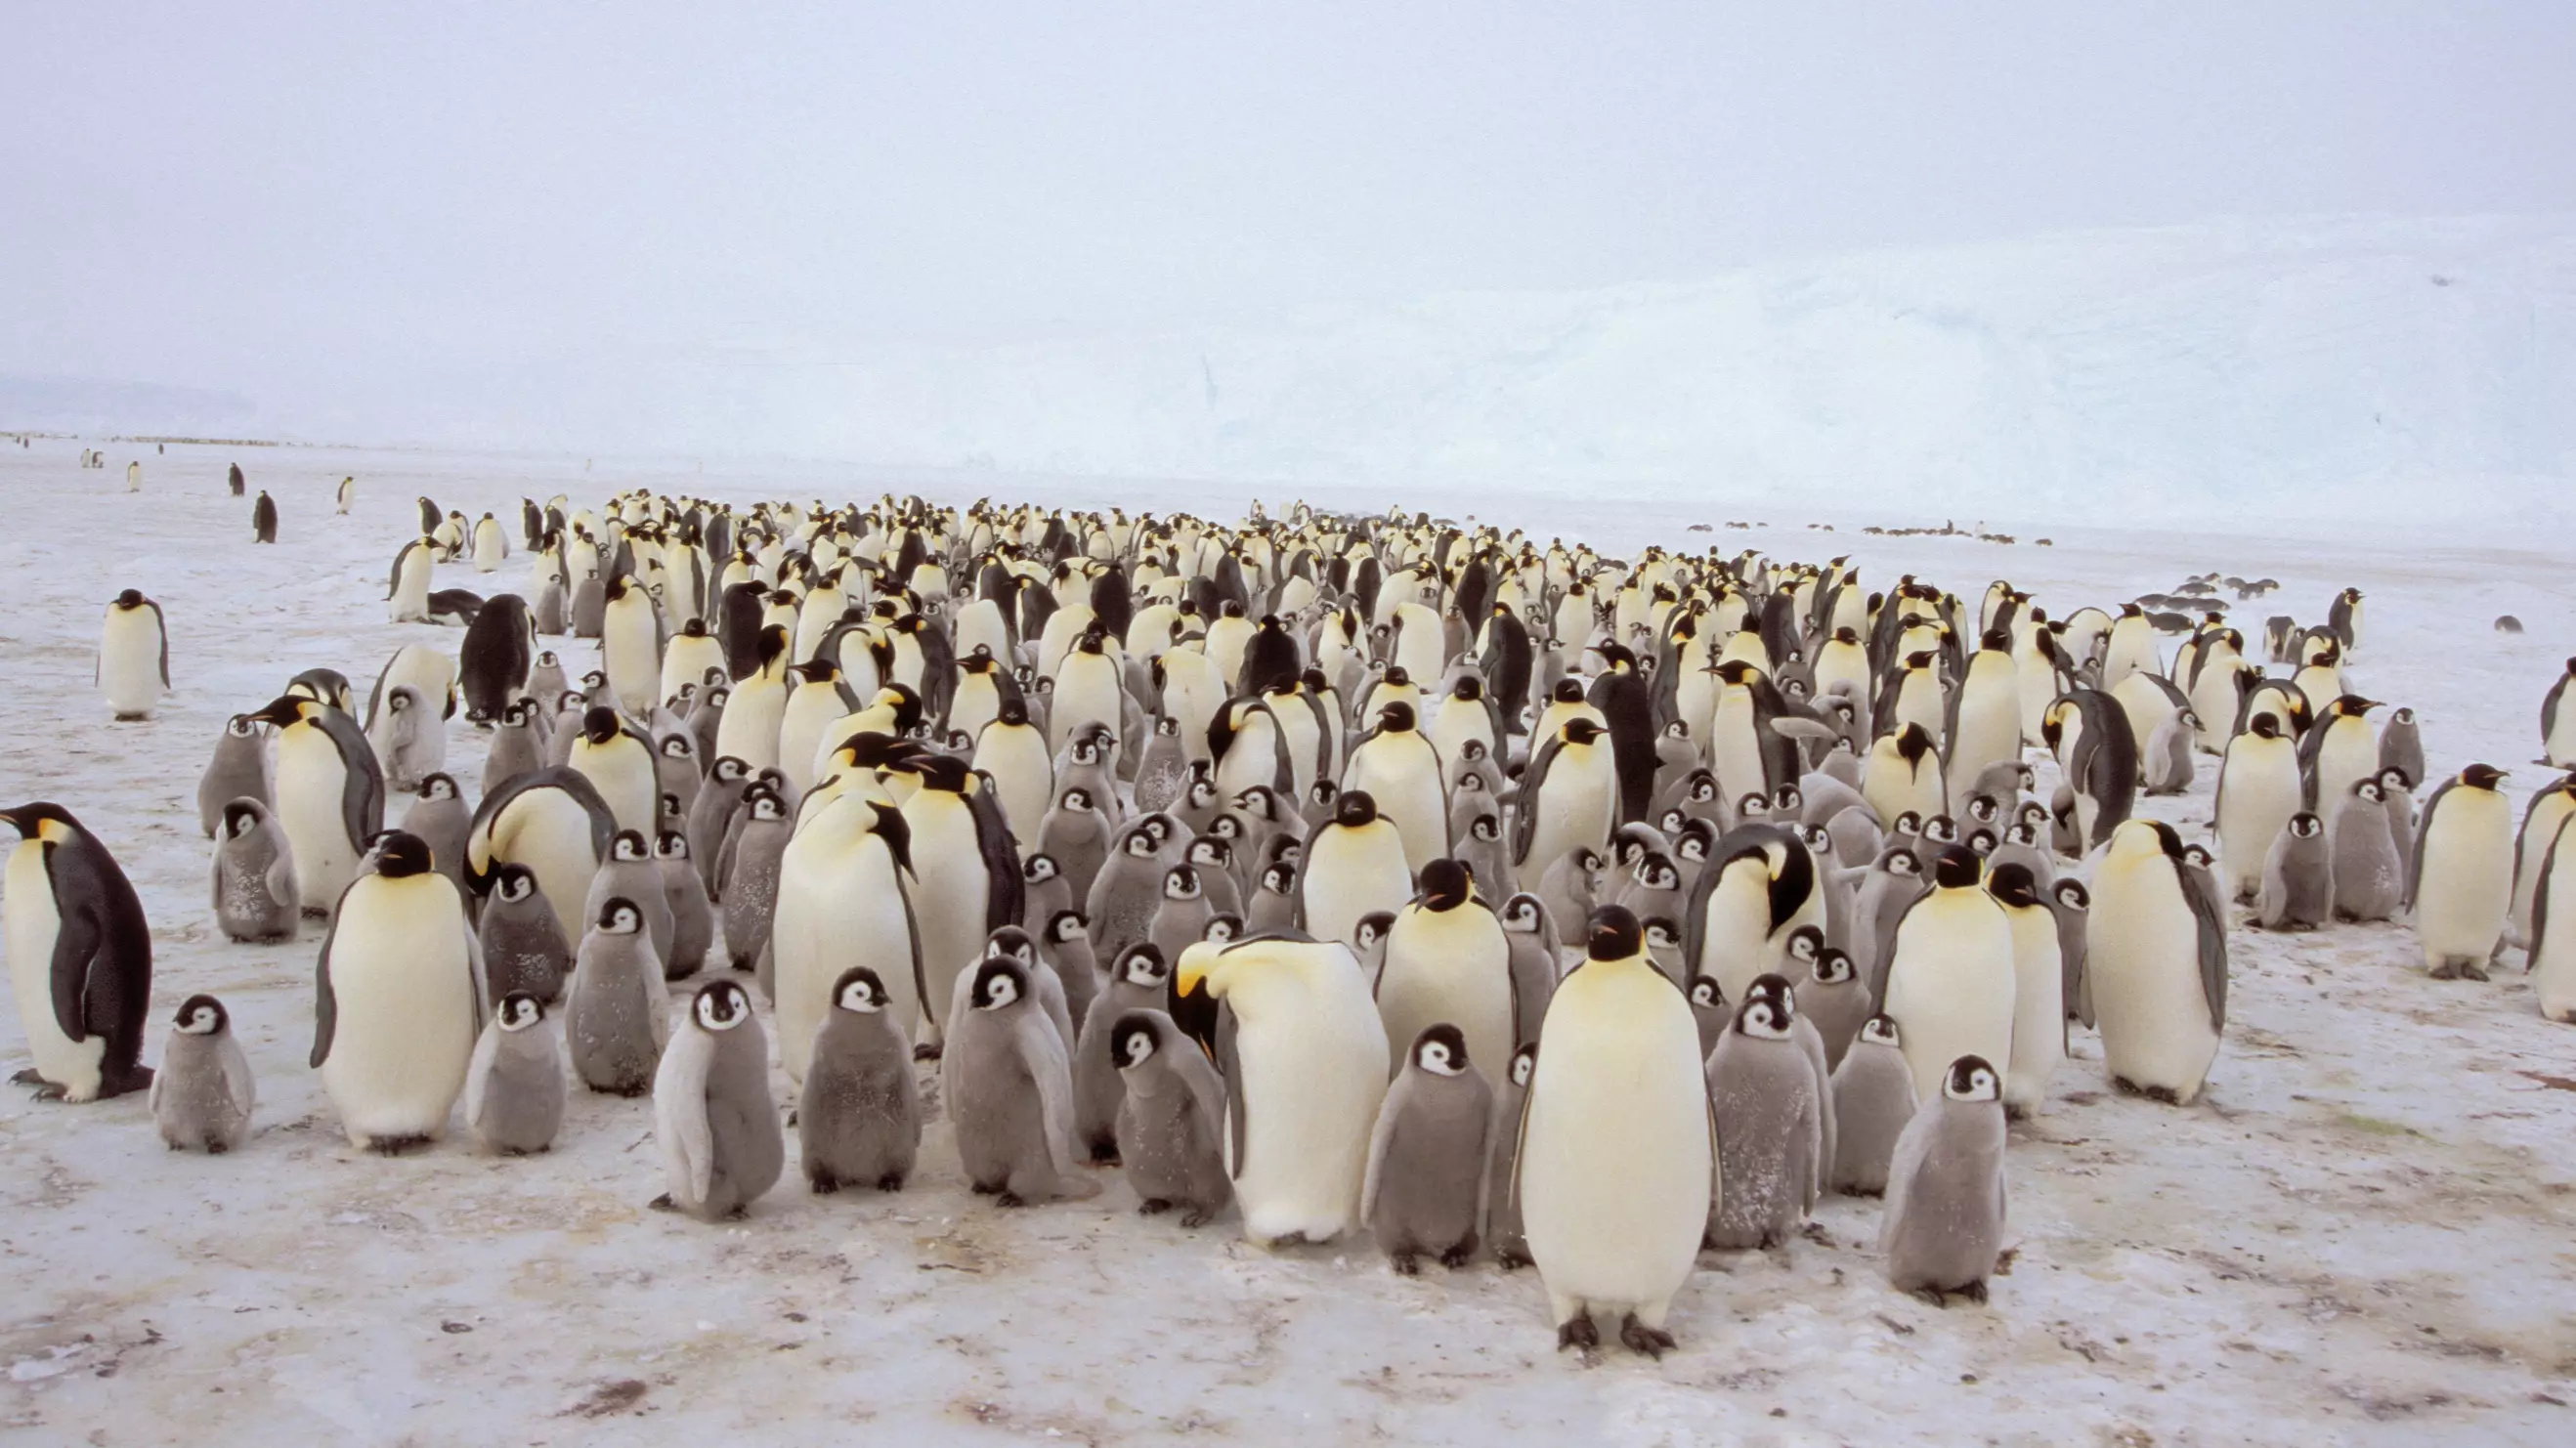 Second Largest Emperor Penguin Colony In Antarctica Has Been Wiped Out